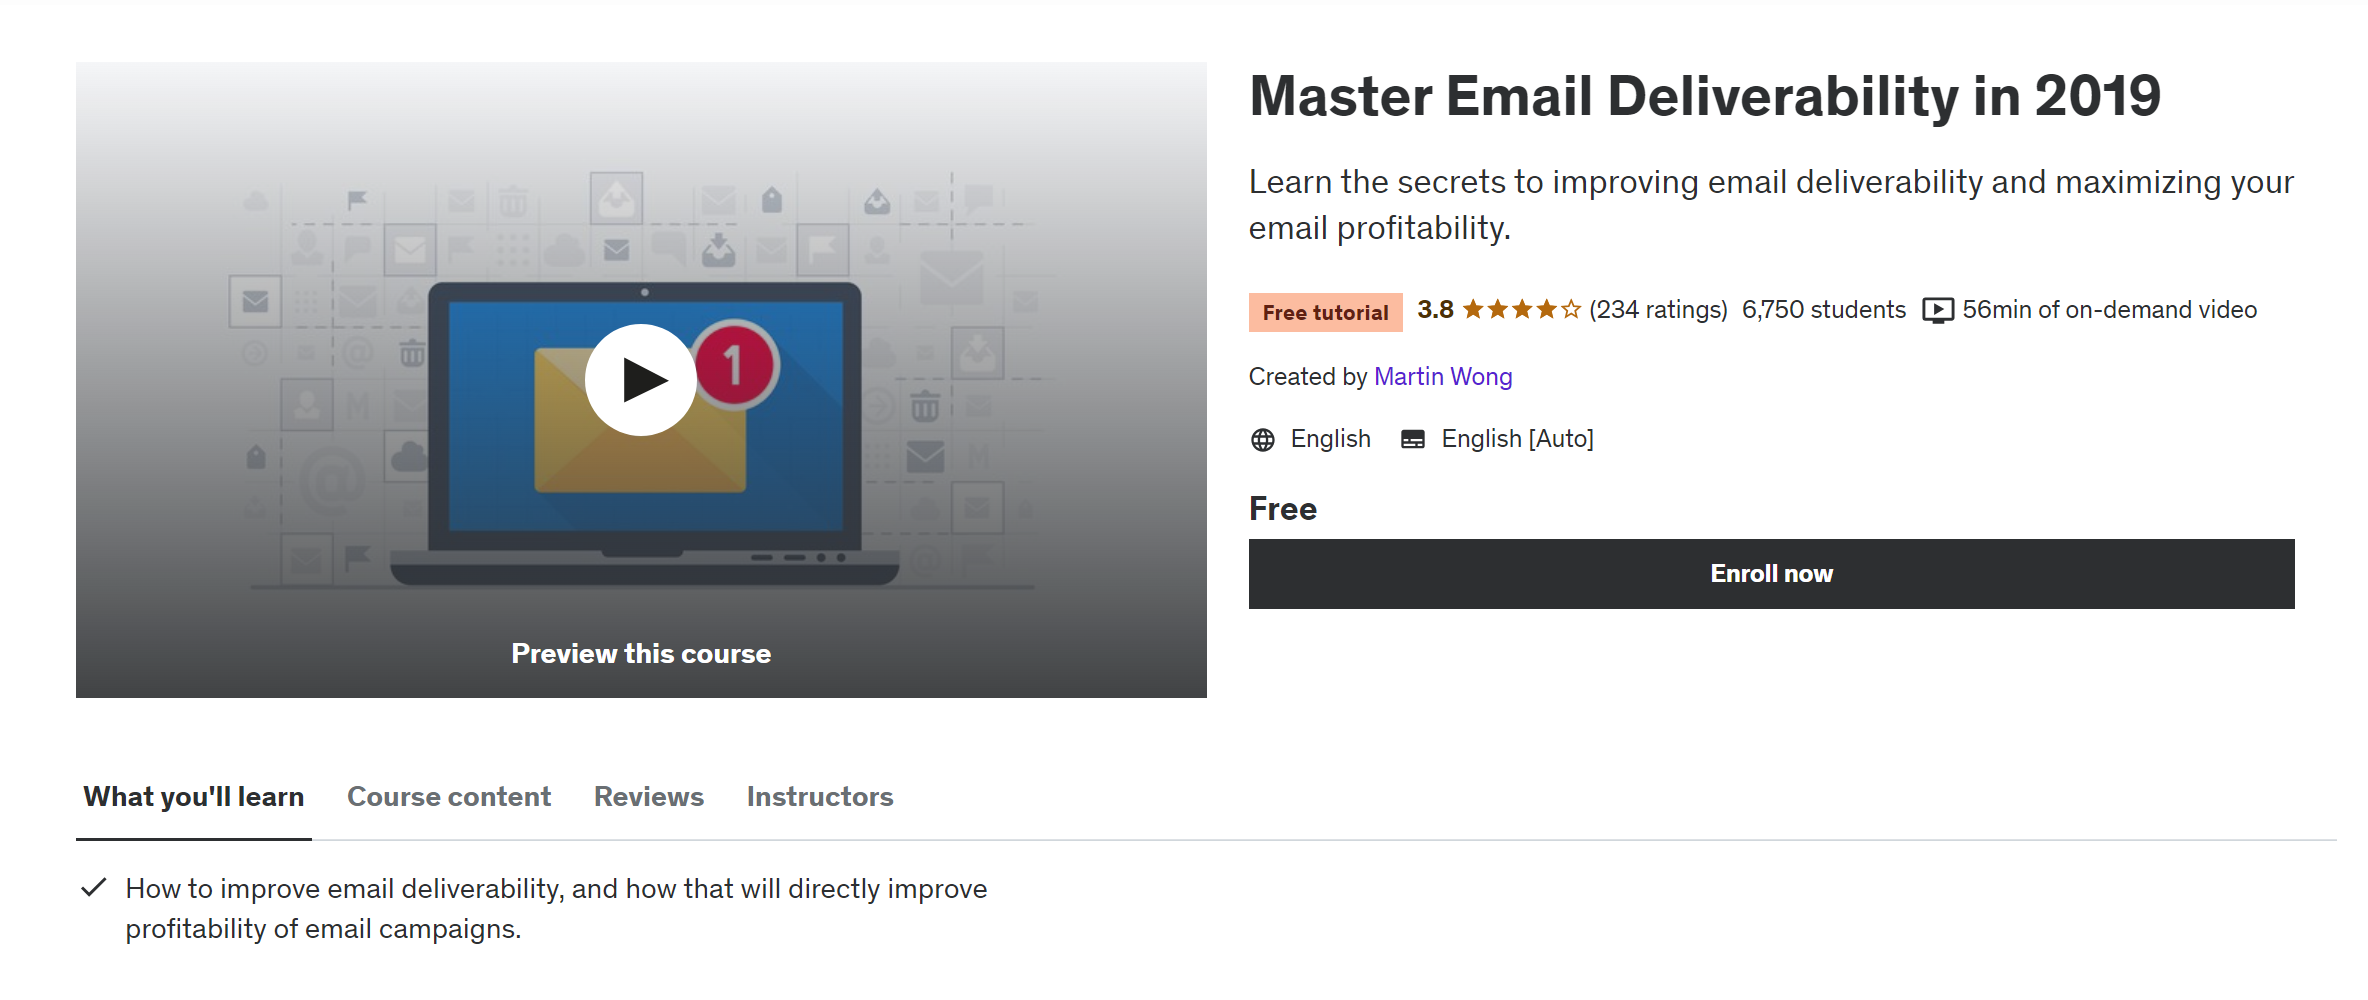 Master Email Deliverability in 2019 via Udemy